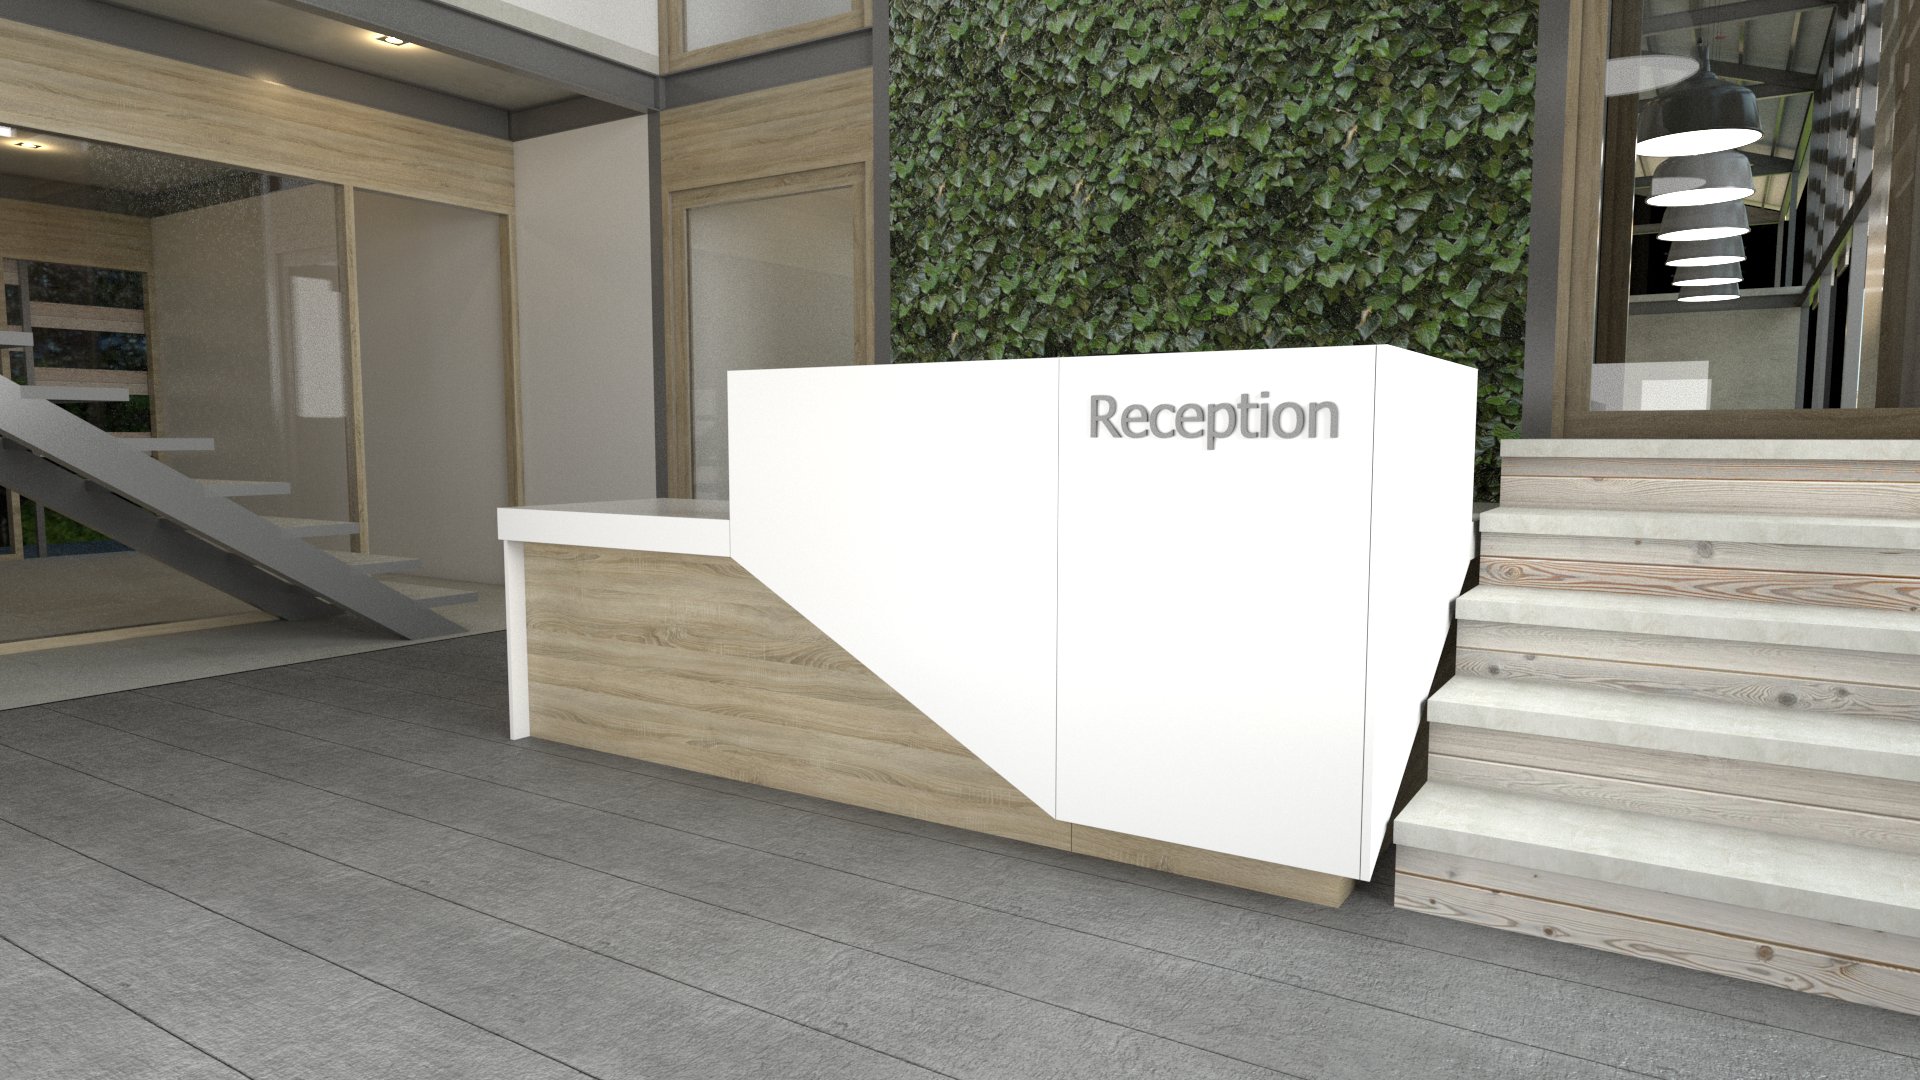 Best reception counters designed for the office - Equip office reception desks comprehensively